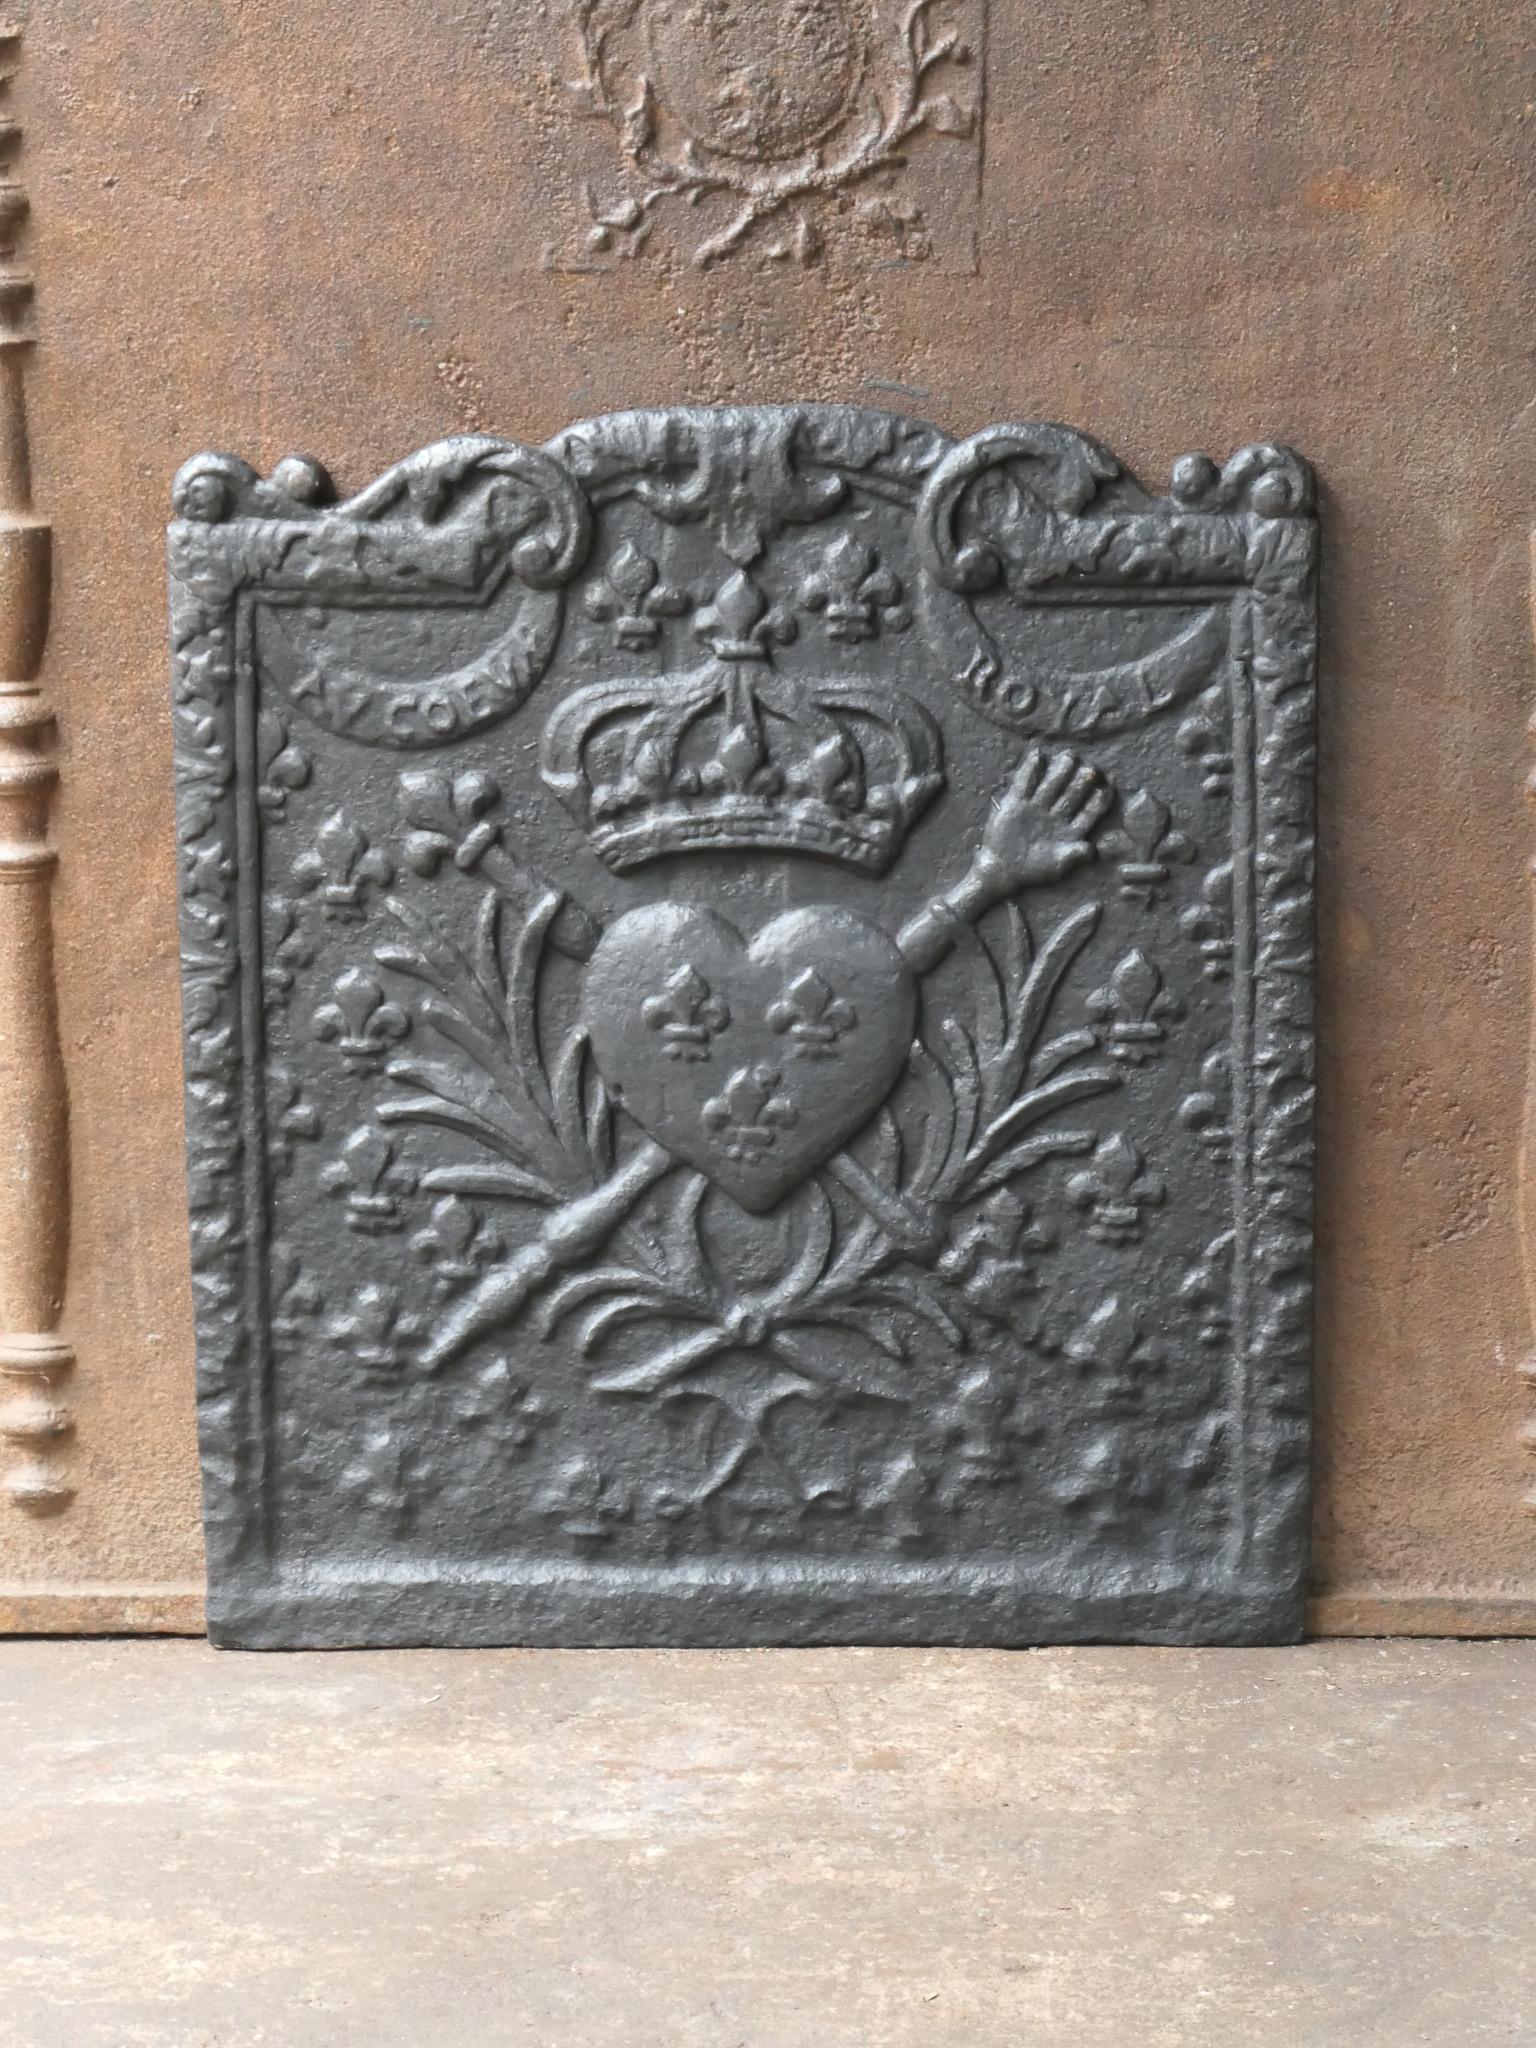 18th century French Louis XV period fireback with the Arms of France. A coat of arms of the House of Bourbon, an originally French royal house that became a major dynasty in Europe. The house delivered kings for Spain (Navarra), France, both